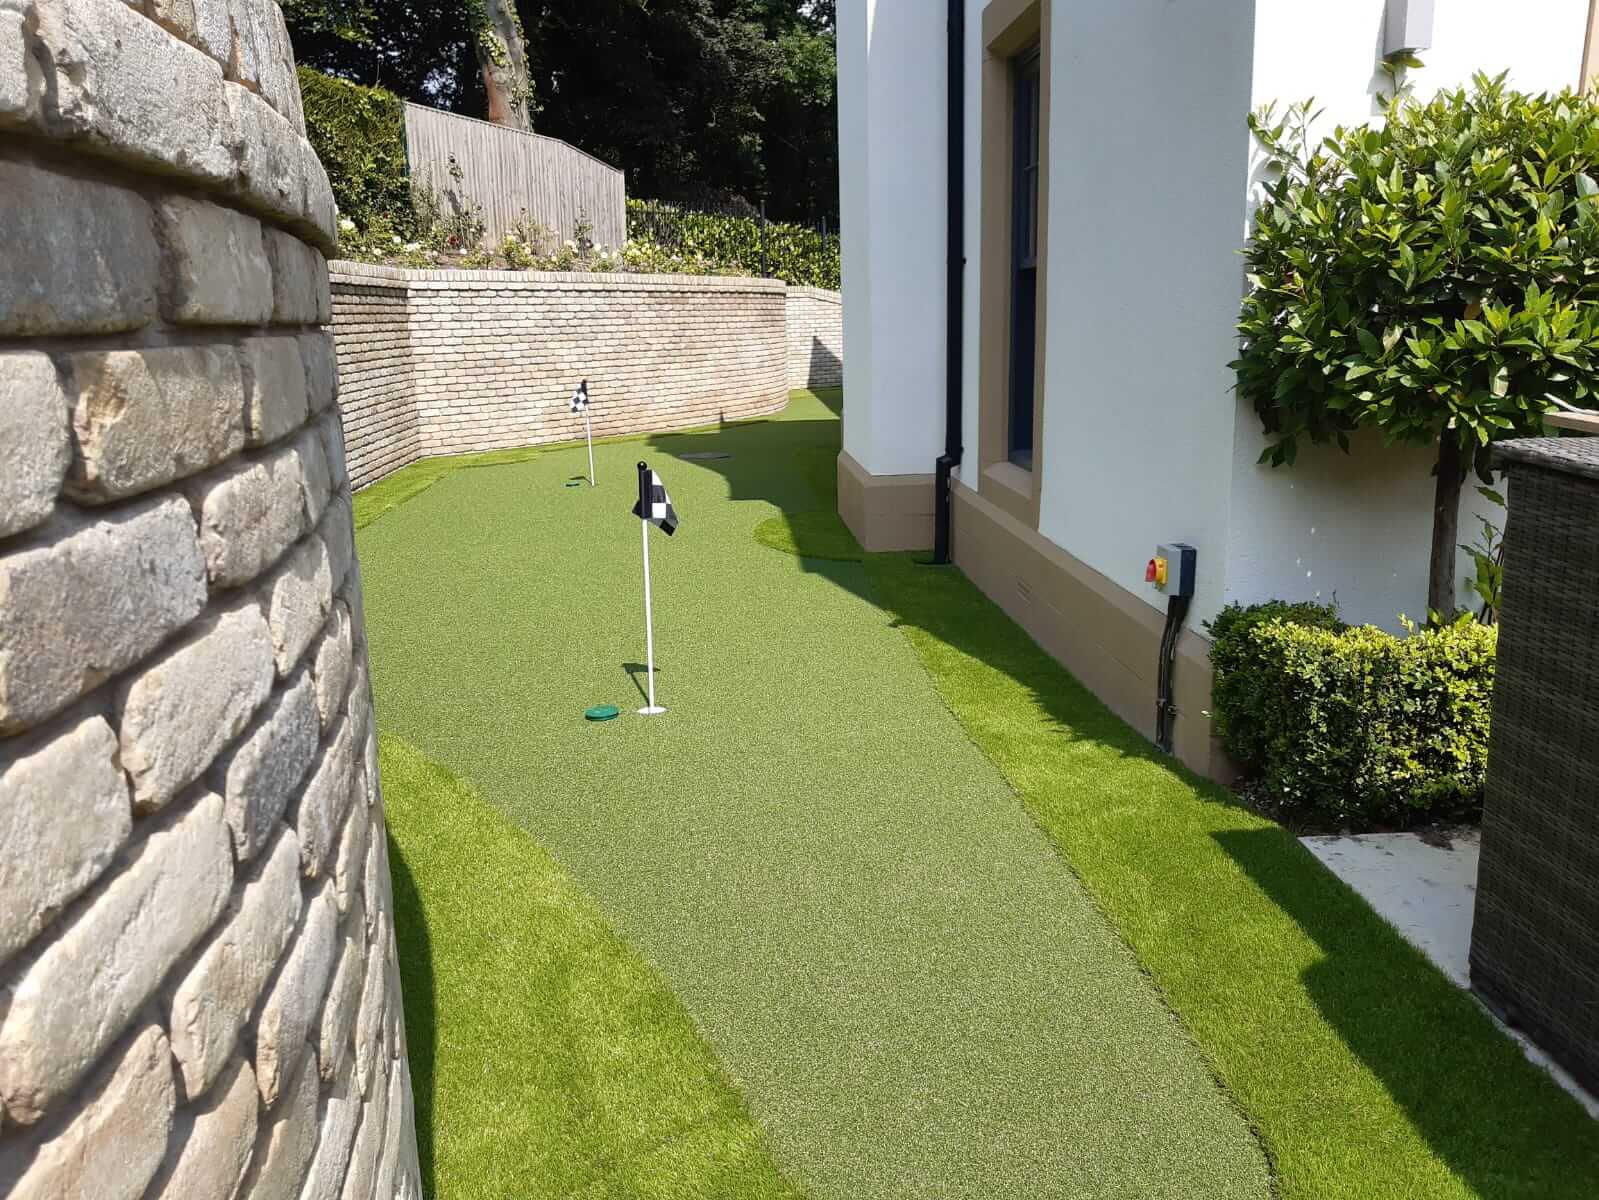 Photo of a 9 hole garden putting green going down the side of the house.